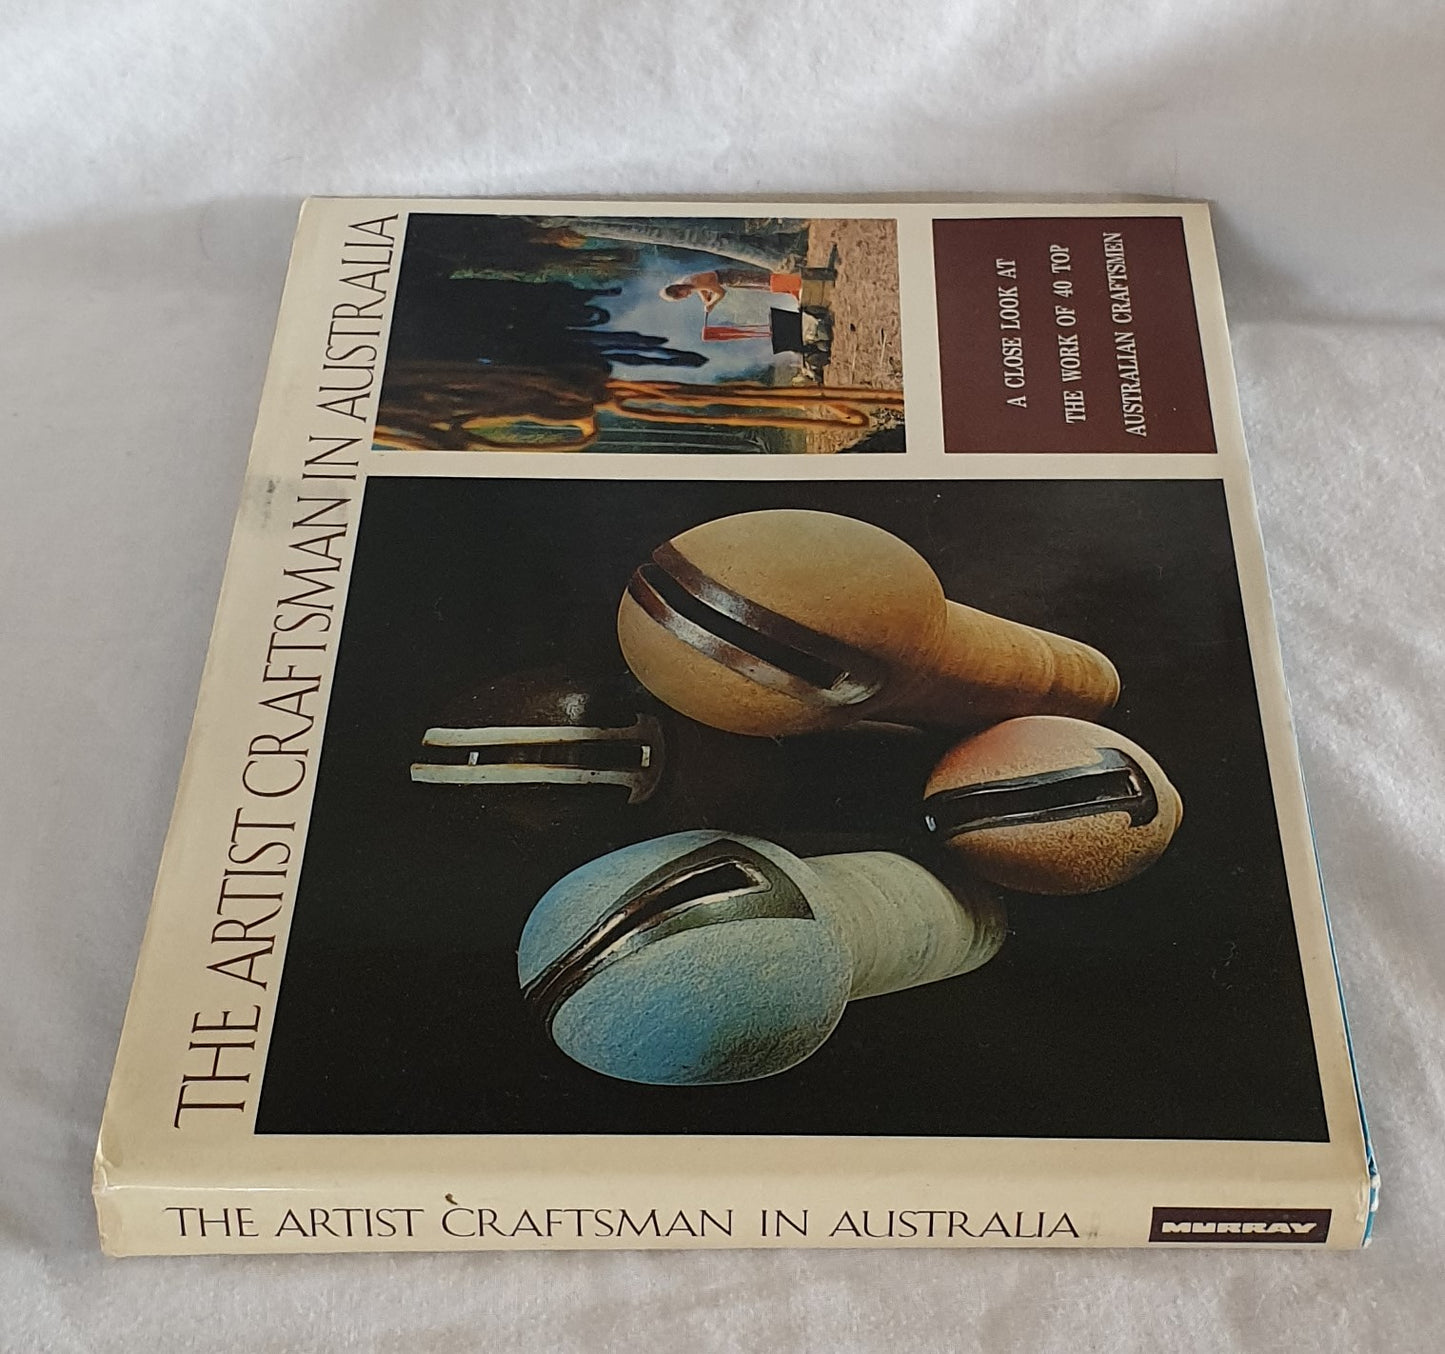 The Artist Craftsman in Australia by Fay Bottrell